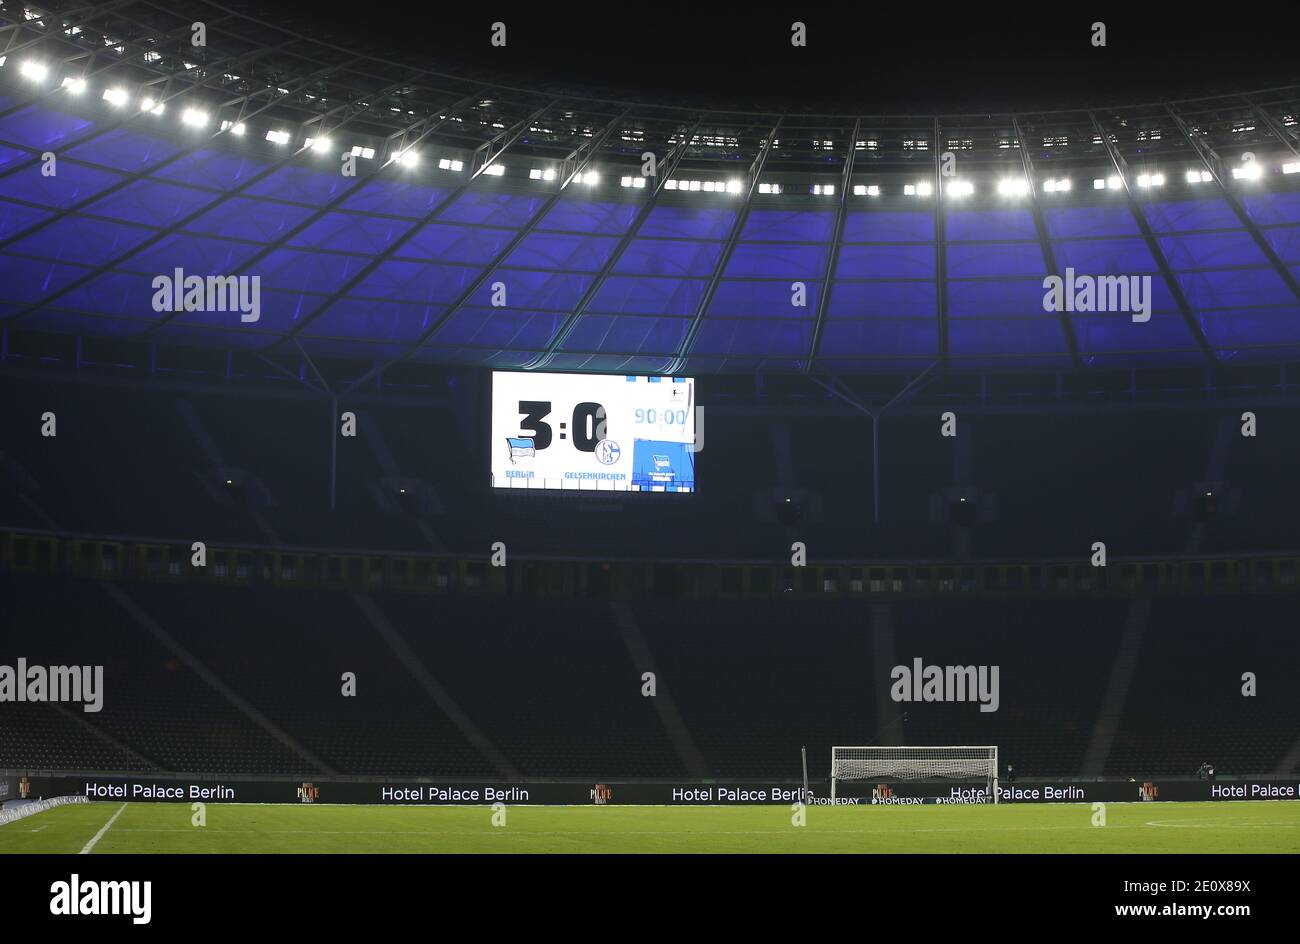 Hertha bsc wall hi-res stock photography and images - Alamy